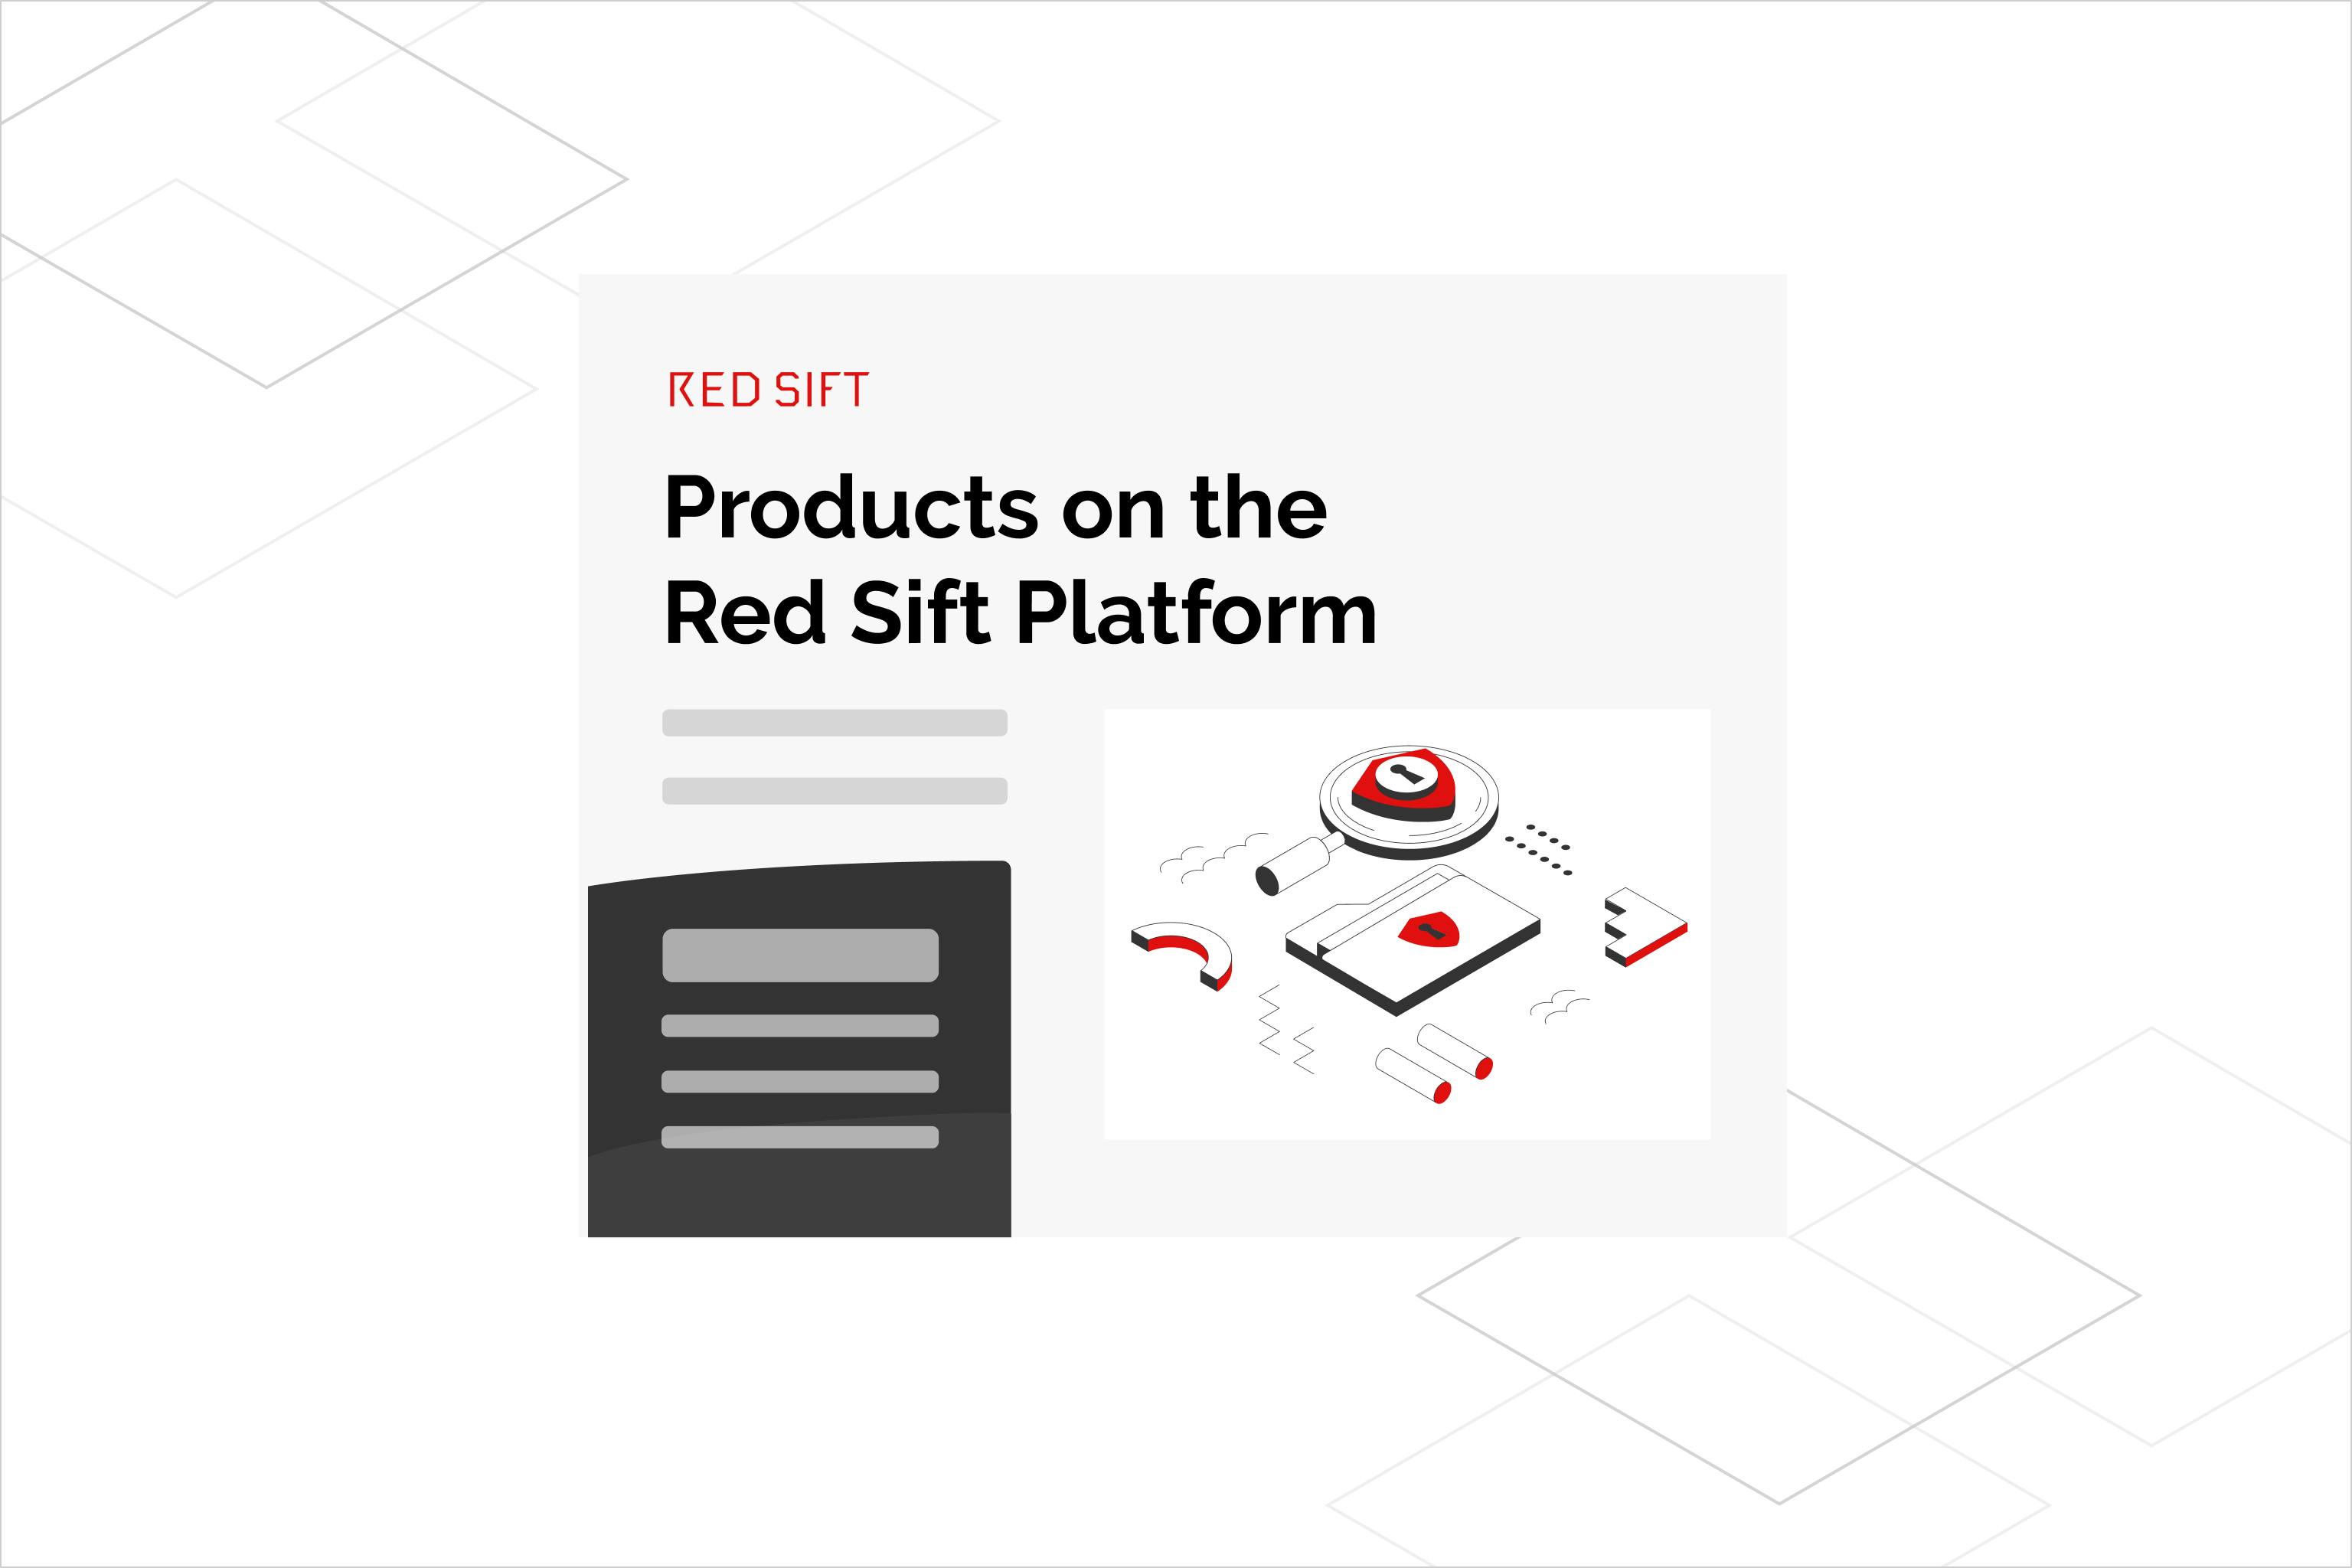 Products on the Red Sift Platform